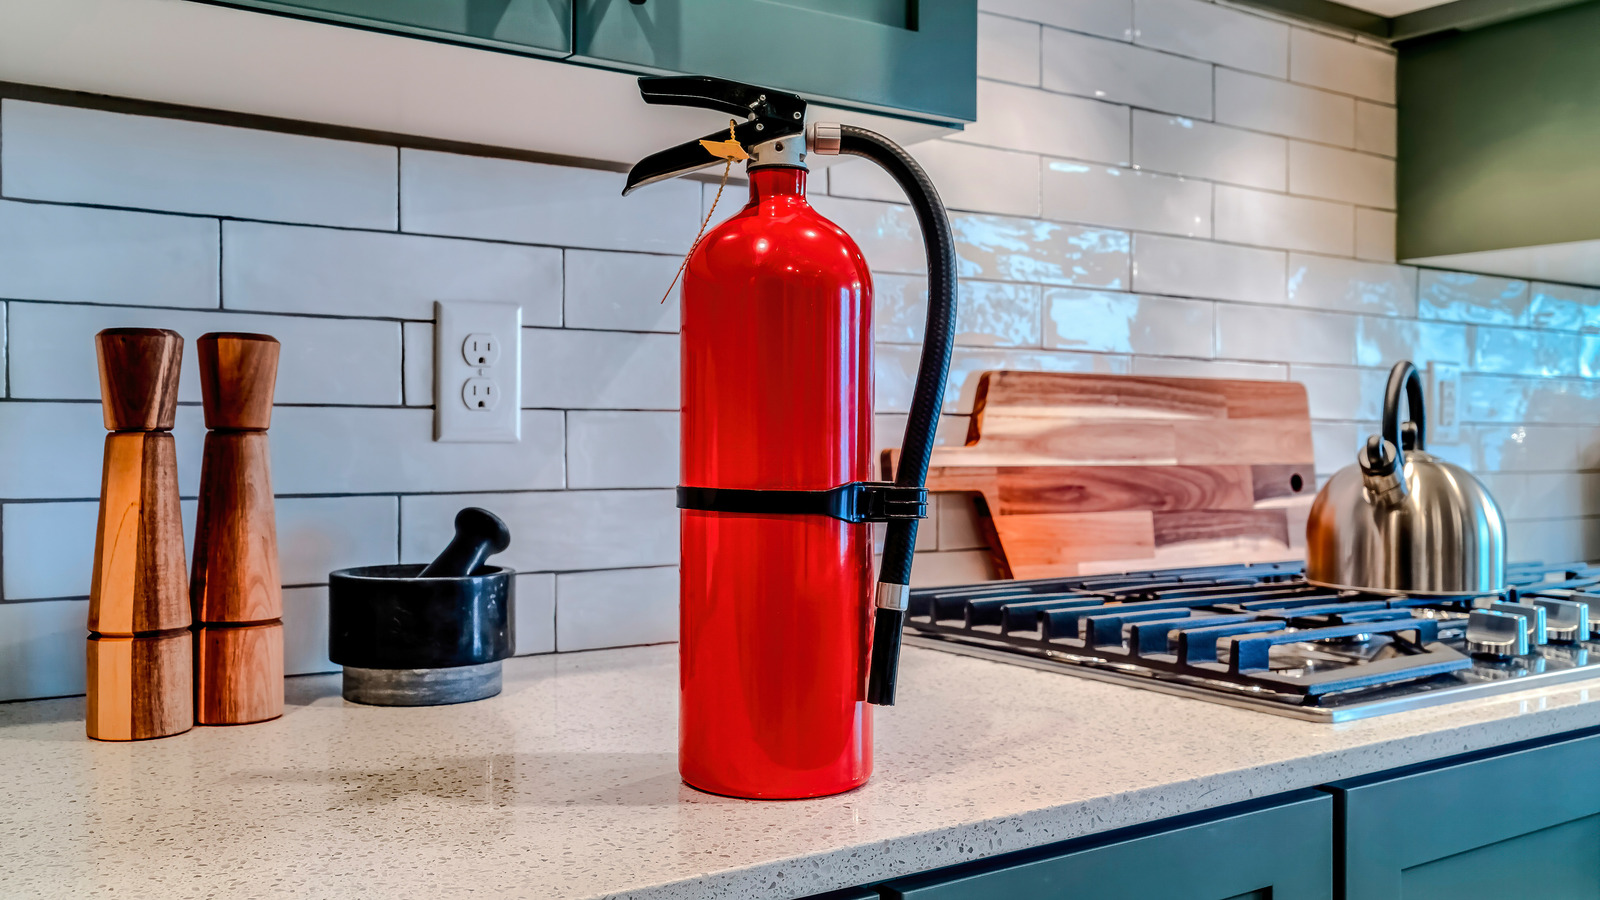 https://www.housedigest.com/img/gallery/the-5-best-places-in-your-home-to-store-your-fire-extinguisher/l-intro-1664576724.jpg